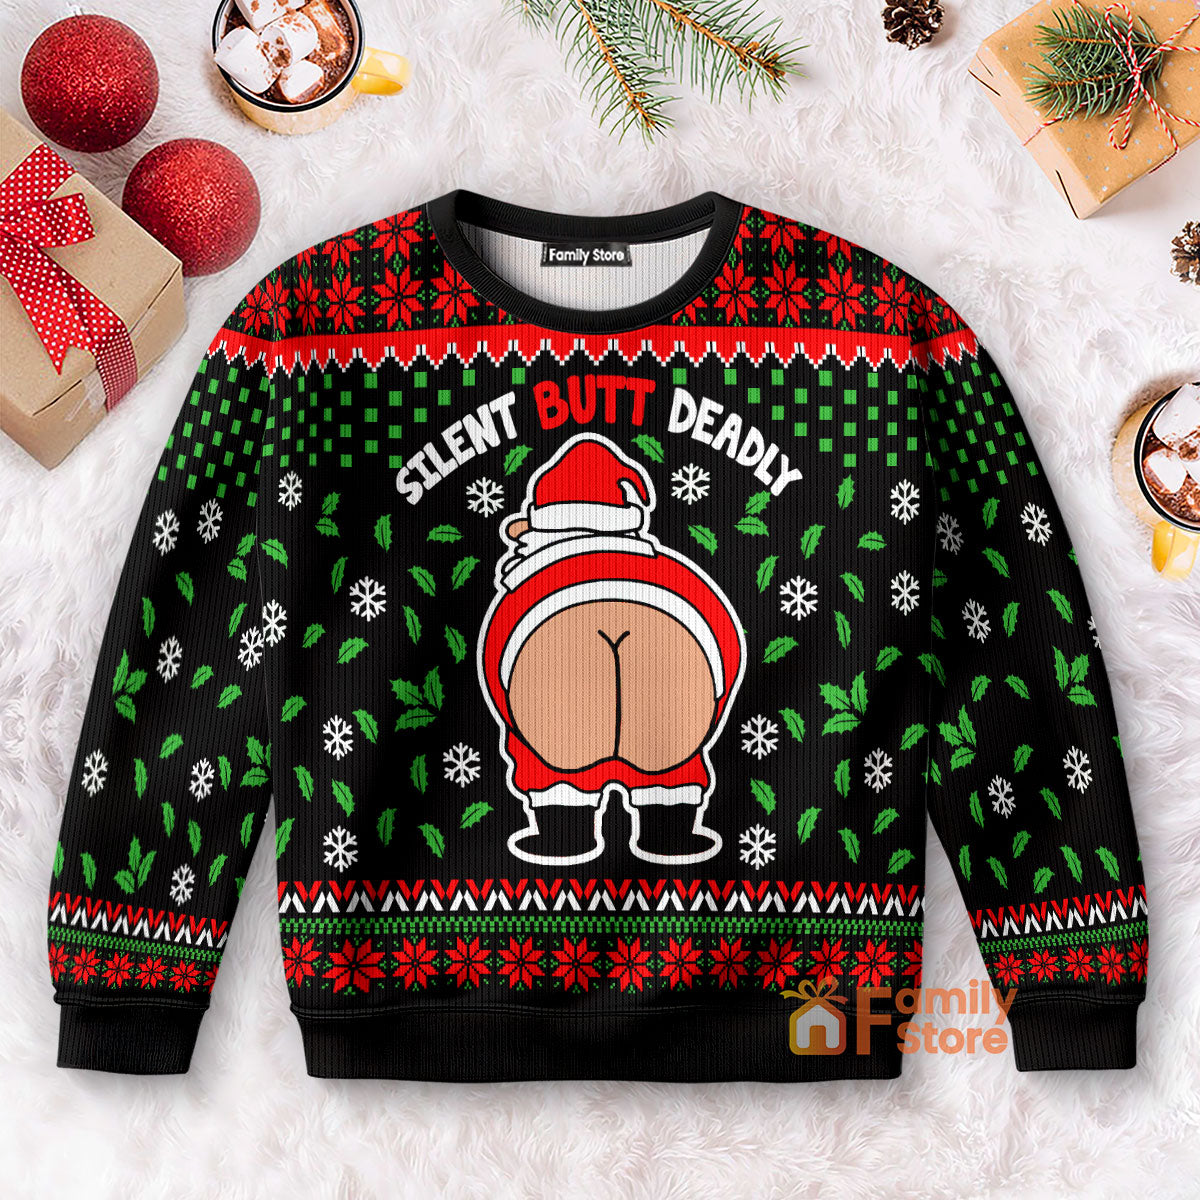 Funny Silent Butt Deadly Santa Ugly Sweater For Men And Women